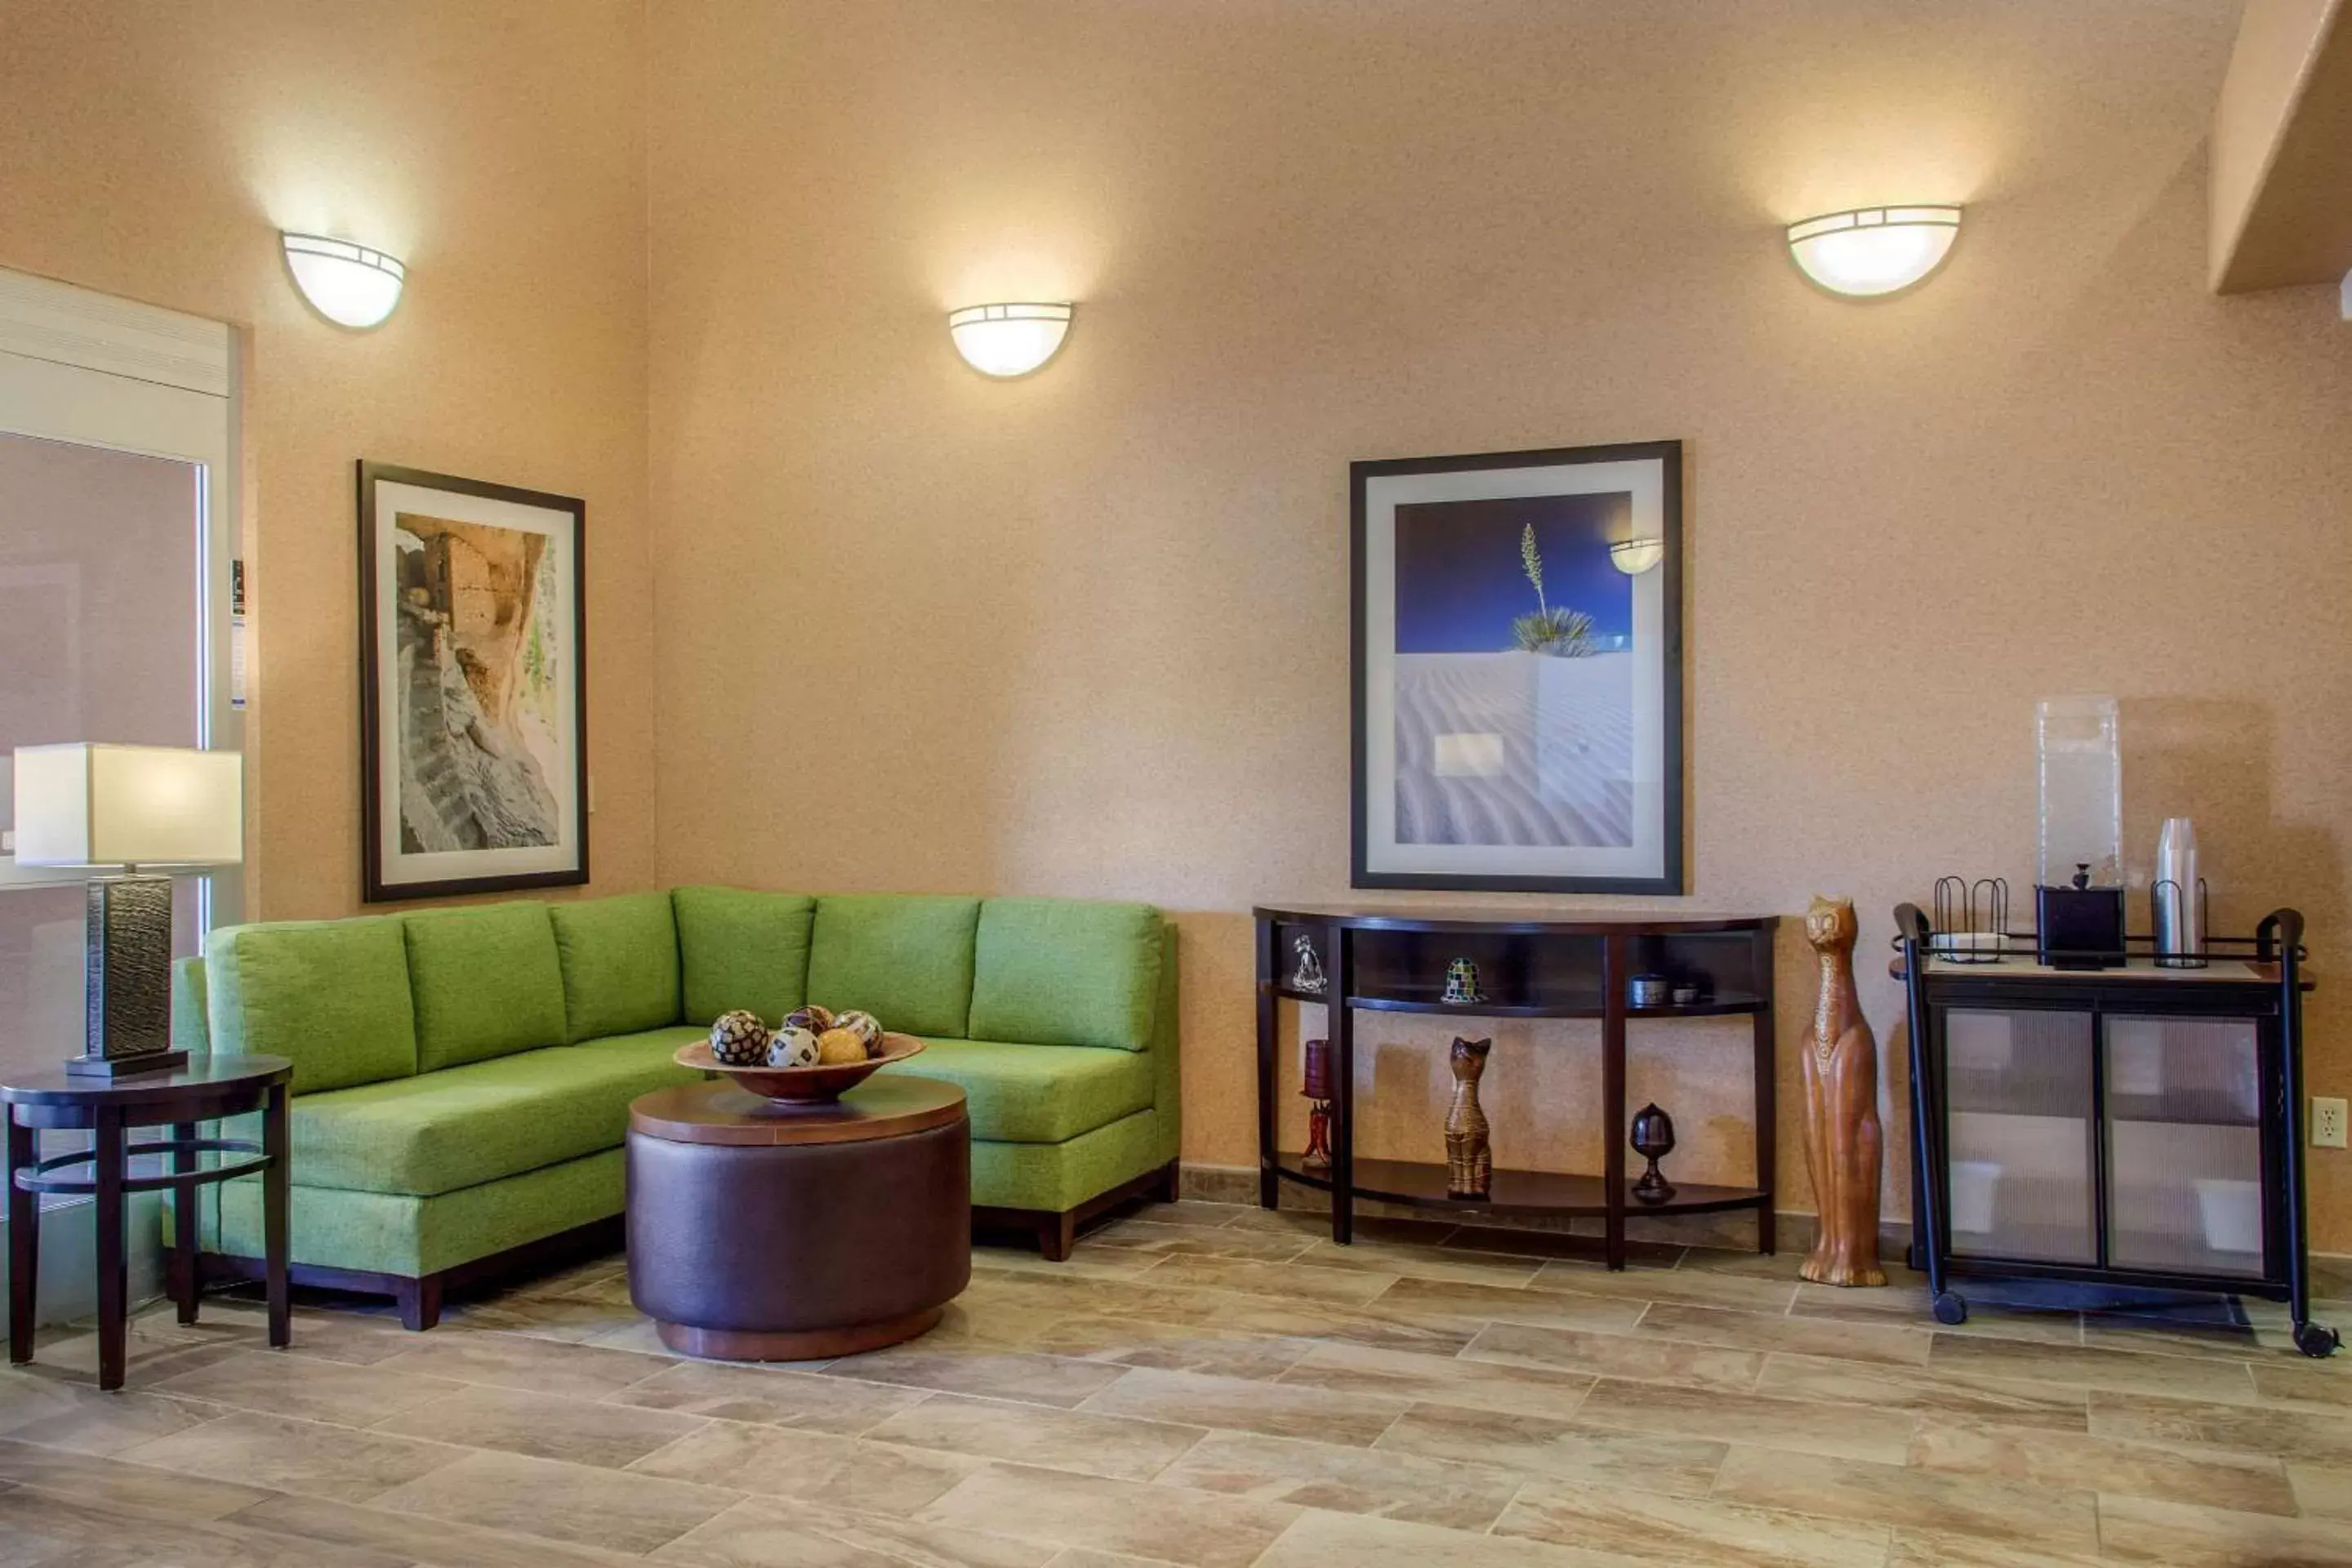 Lobby or reception in Comfort Inn & Suites I-25 near Spaceport America